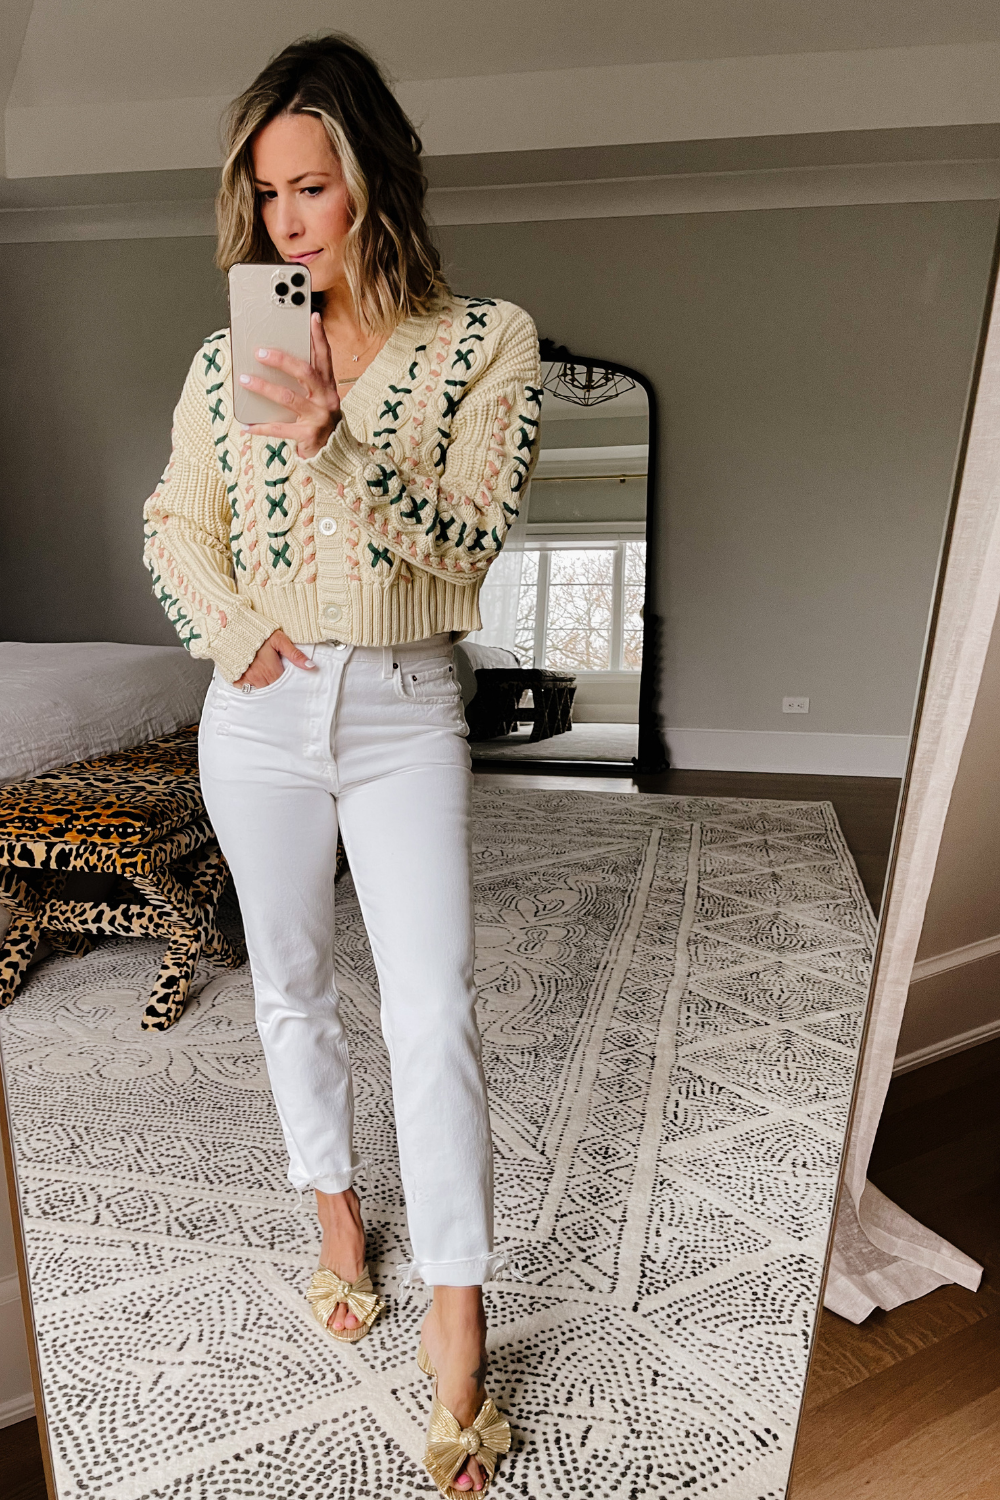 Suzanne taking a mirror selfie wearing a cable cardigan, white cropped denim, and gold metallic heels.